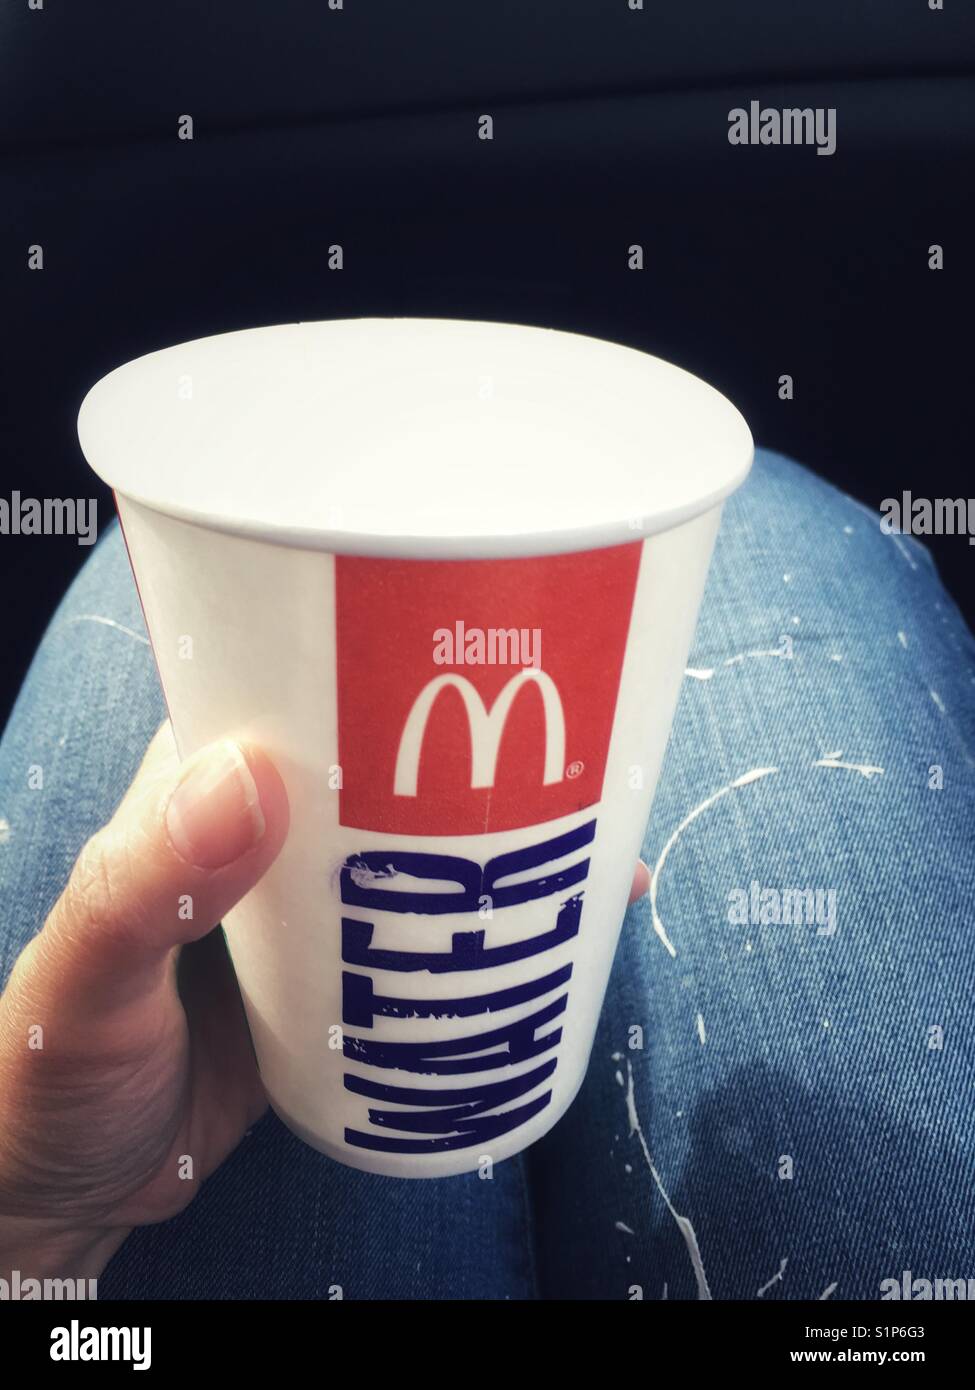 Paper cup with McDonald's logo in a hand Stock Photo - Alamy